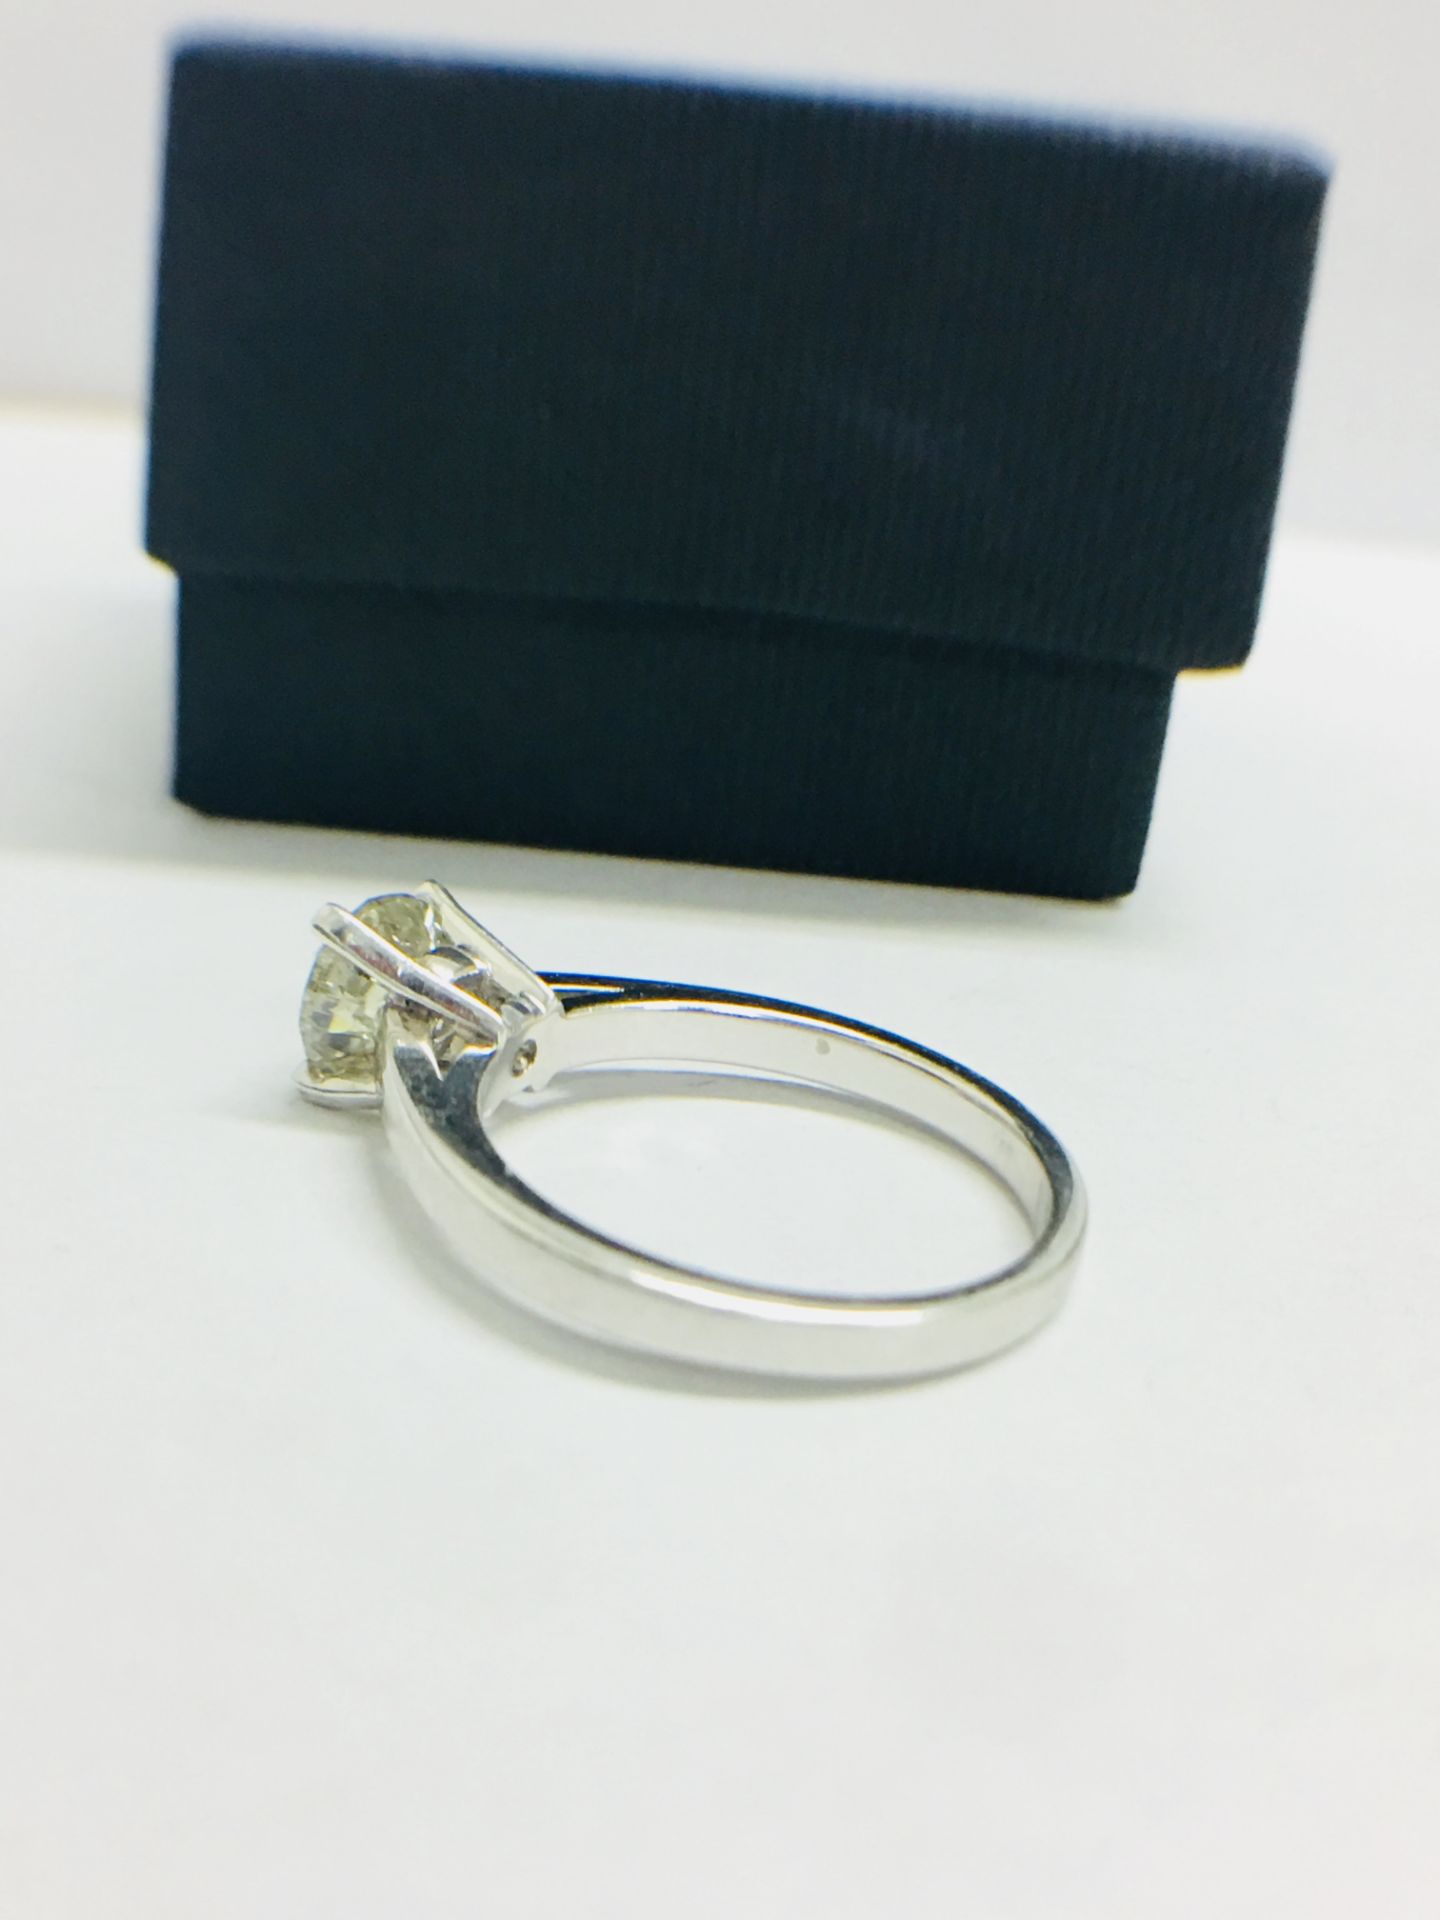 1.23Ct Diamond Solitaire Ring With A Brilliant Cut Diamond. - Image 4 of 8